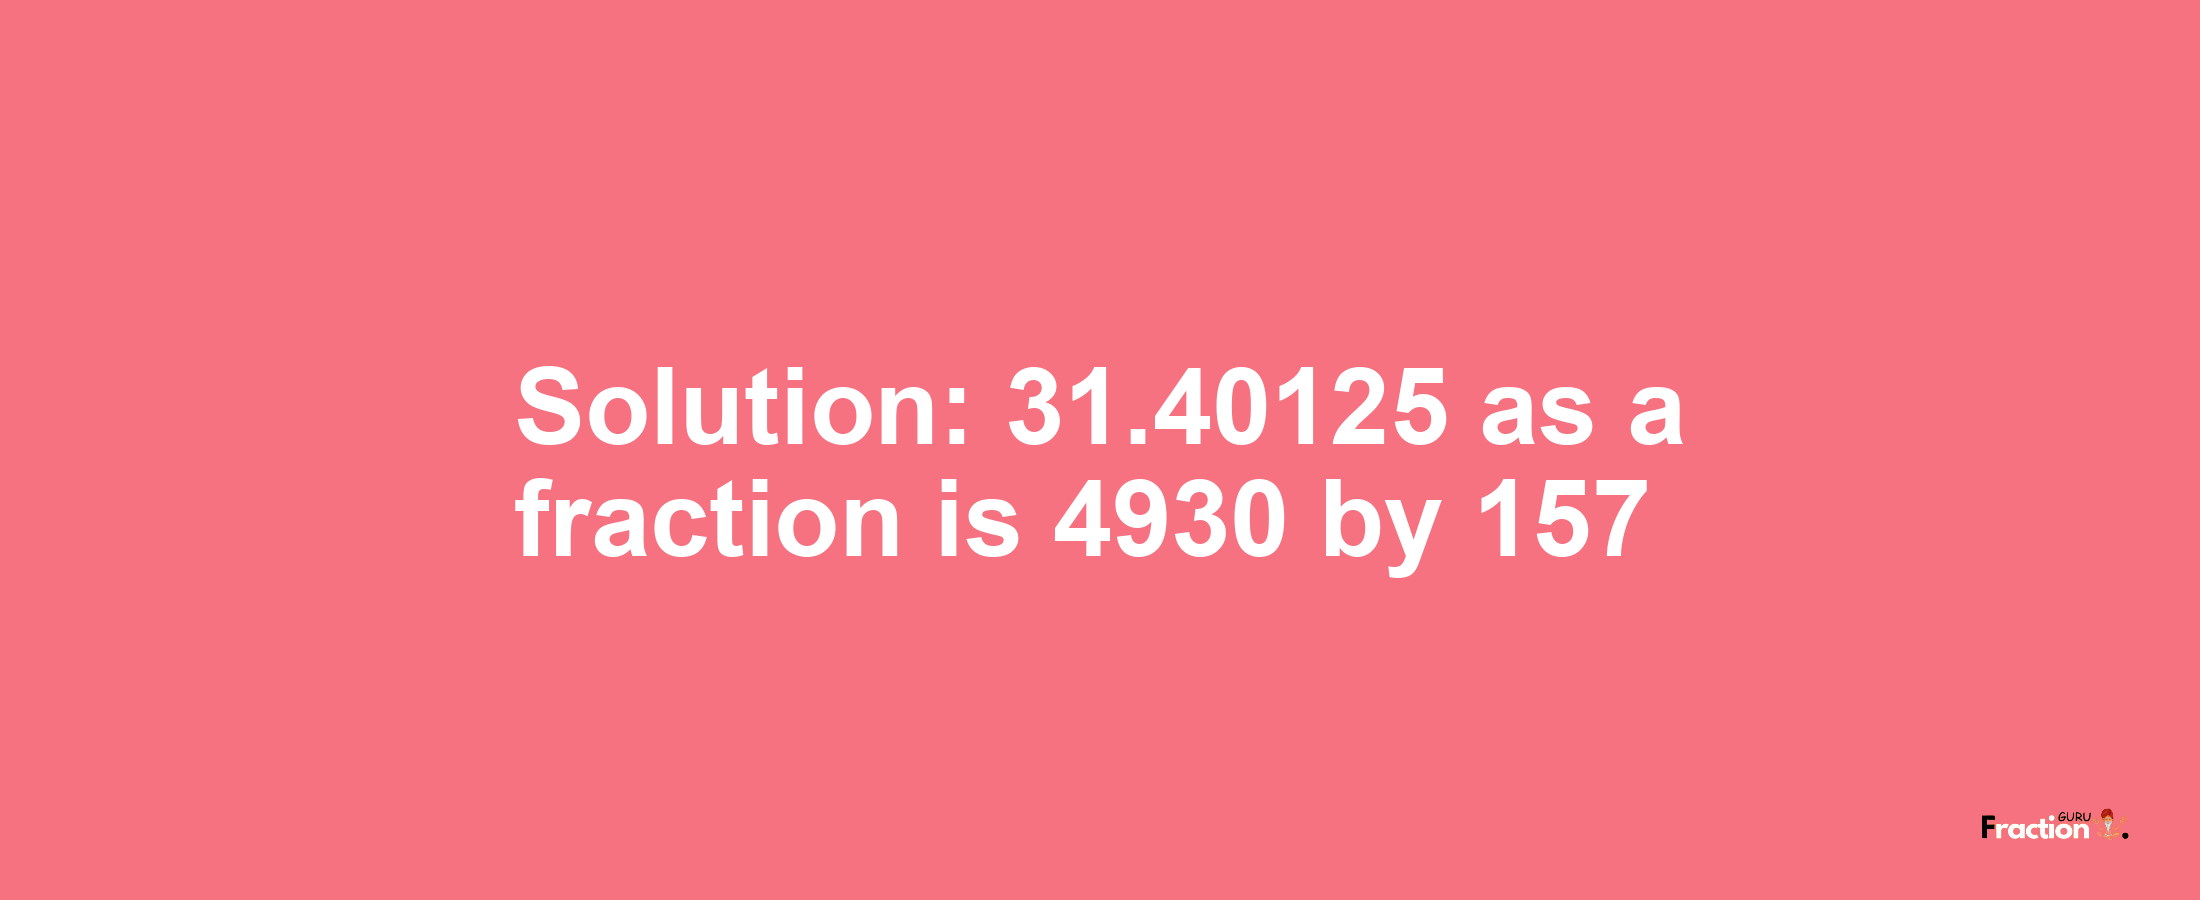 Solution:31.40125 as a fraction is 4930/157